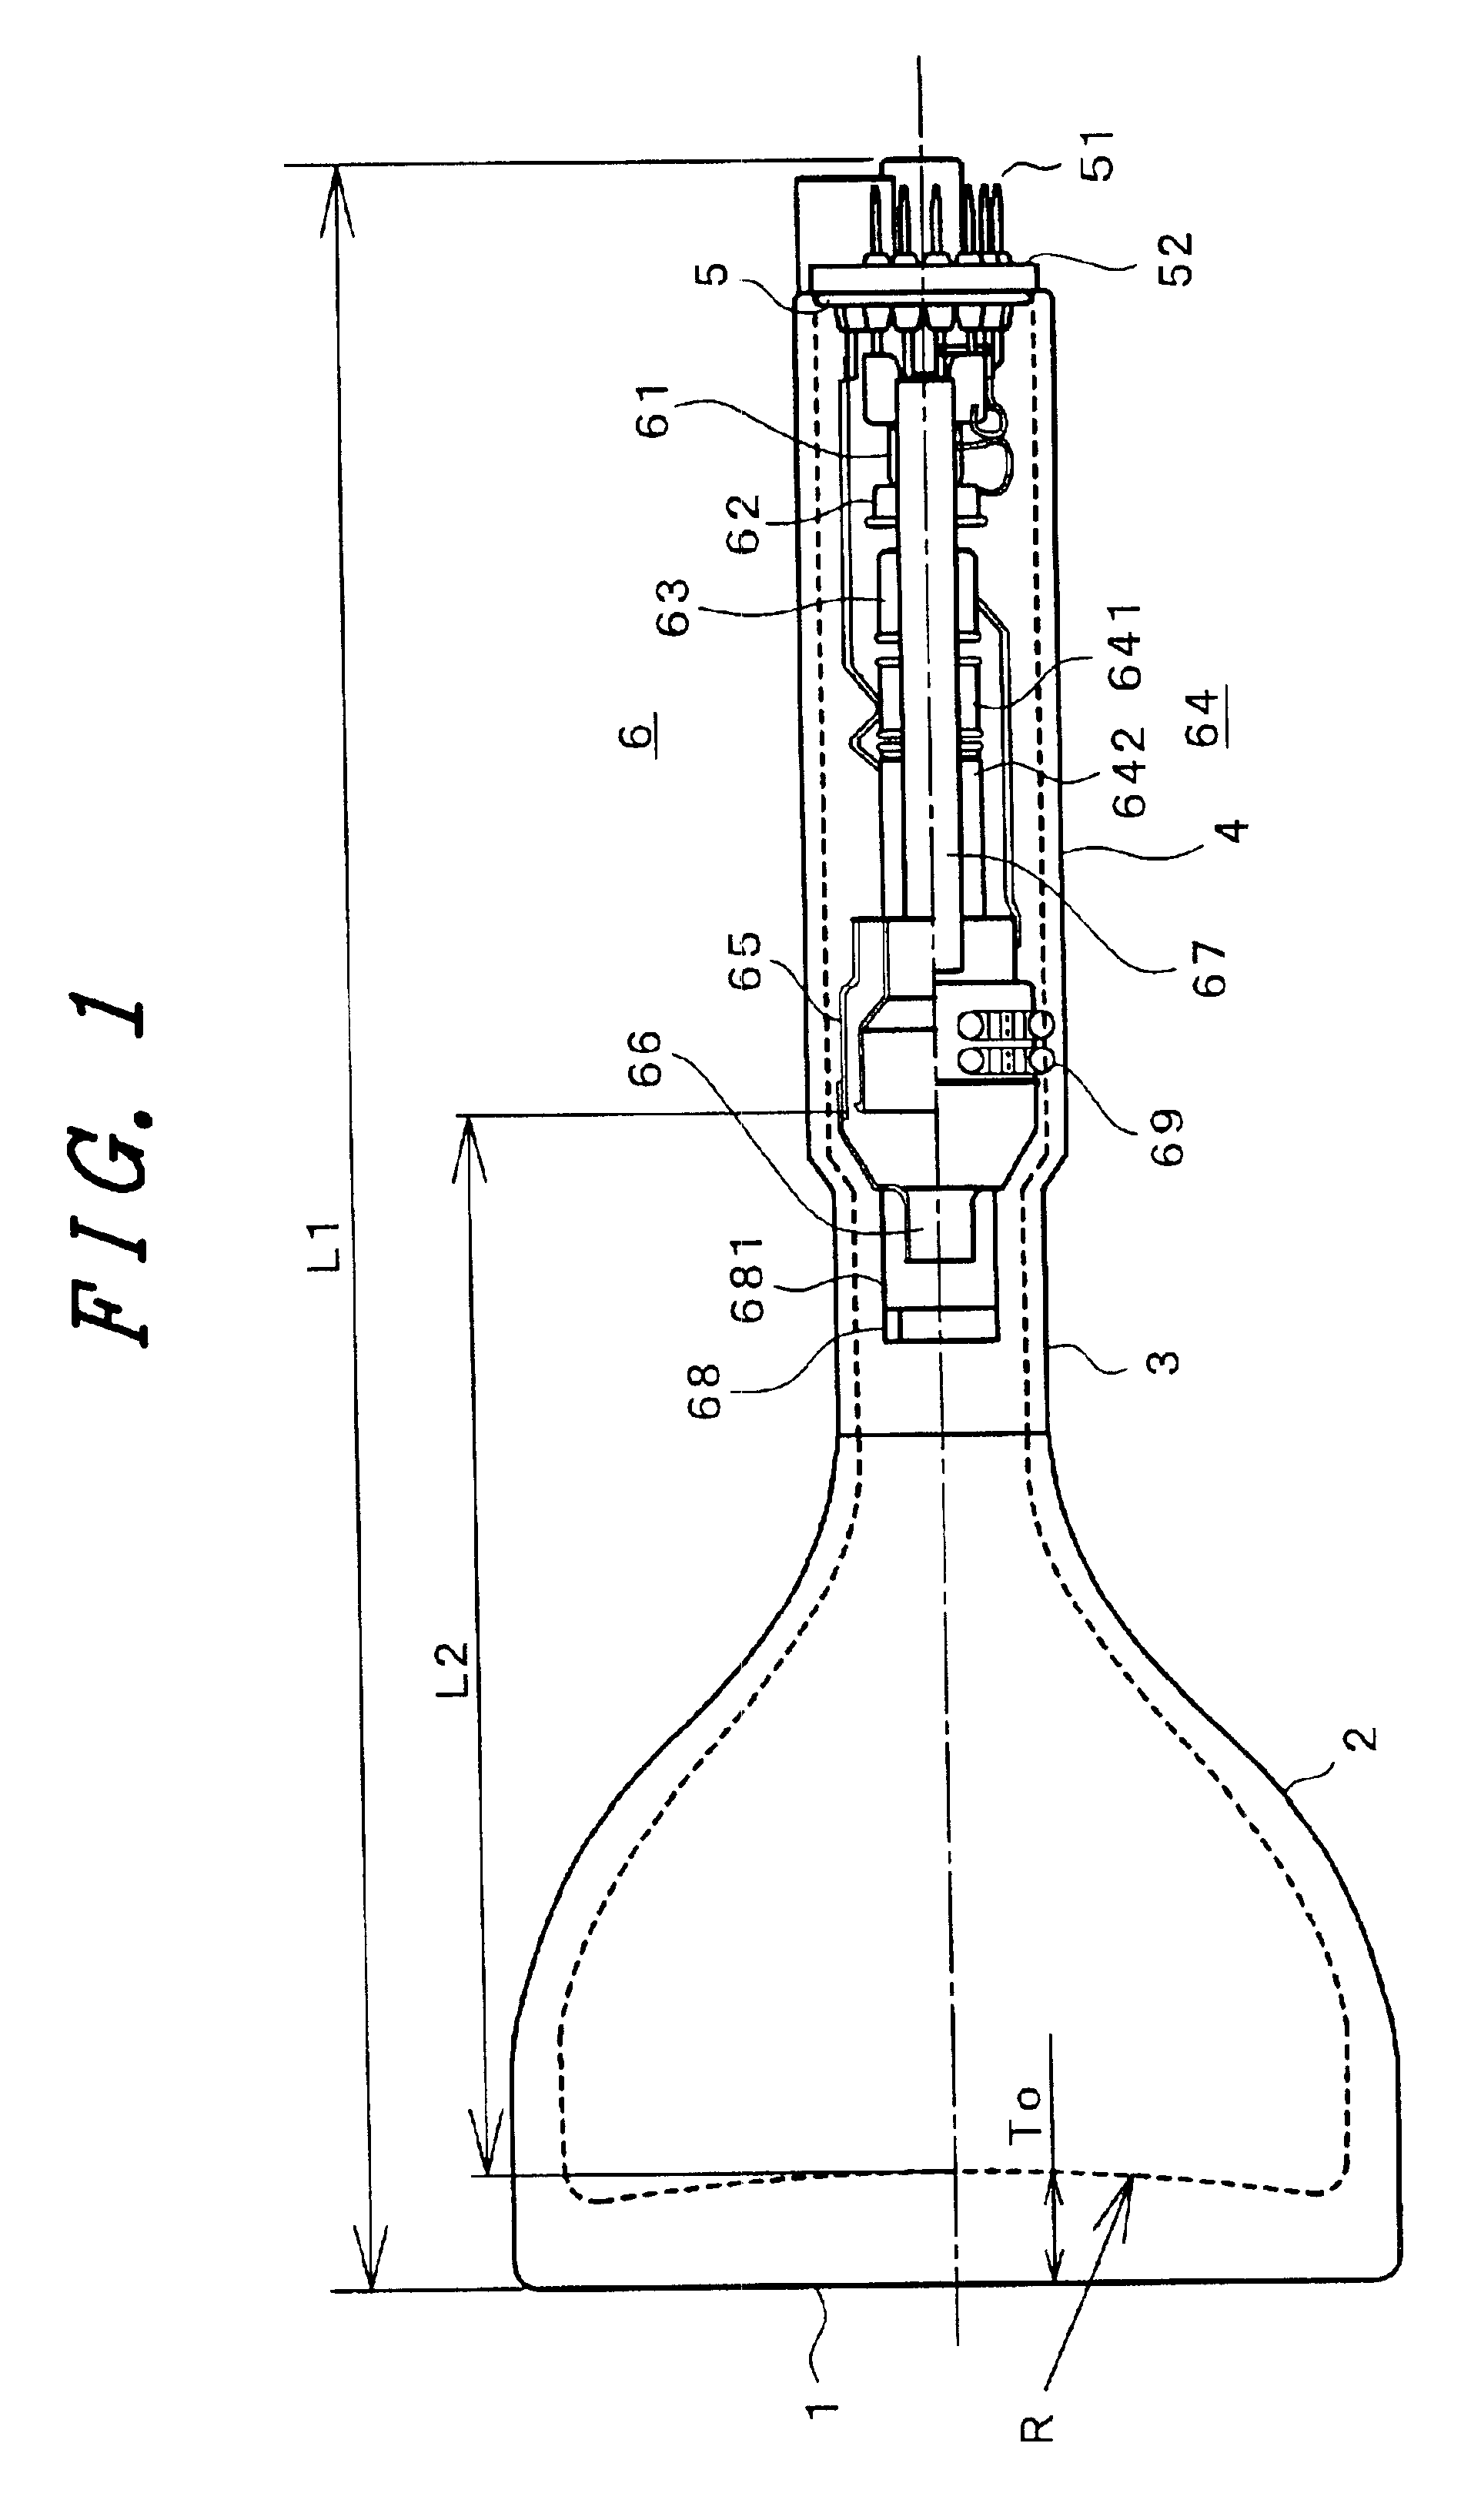 Projection tube having different neck diameters